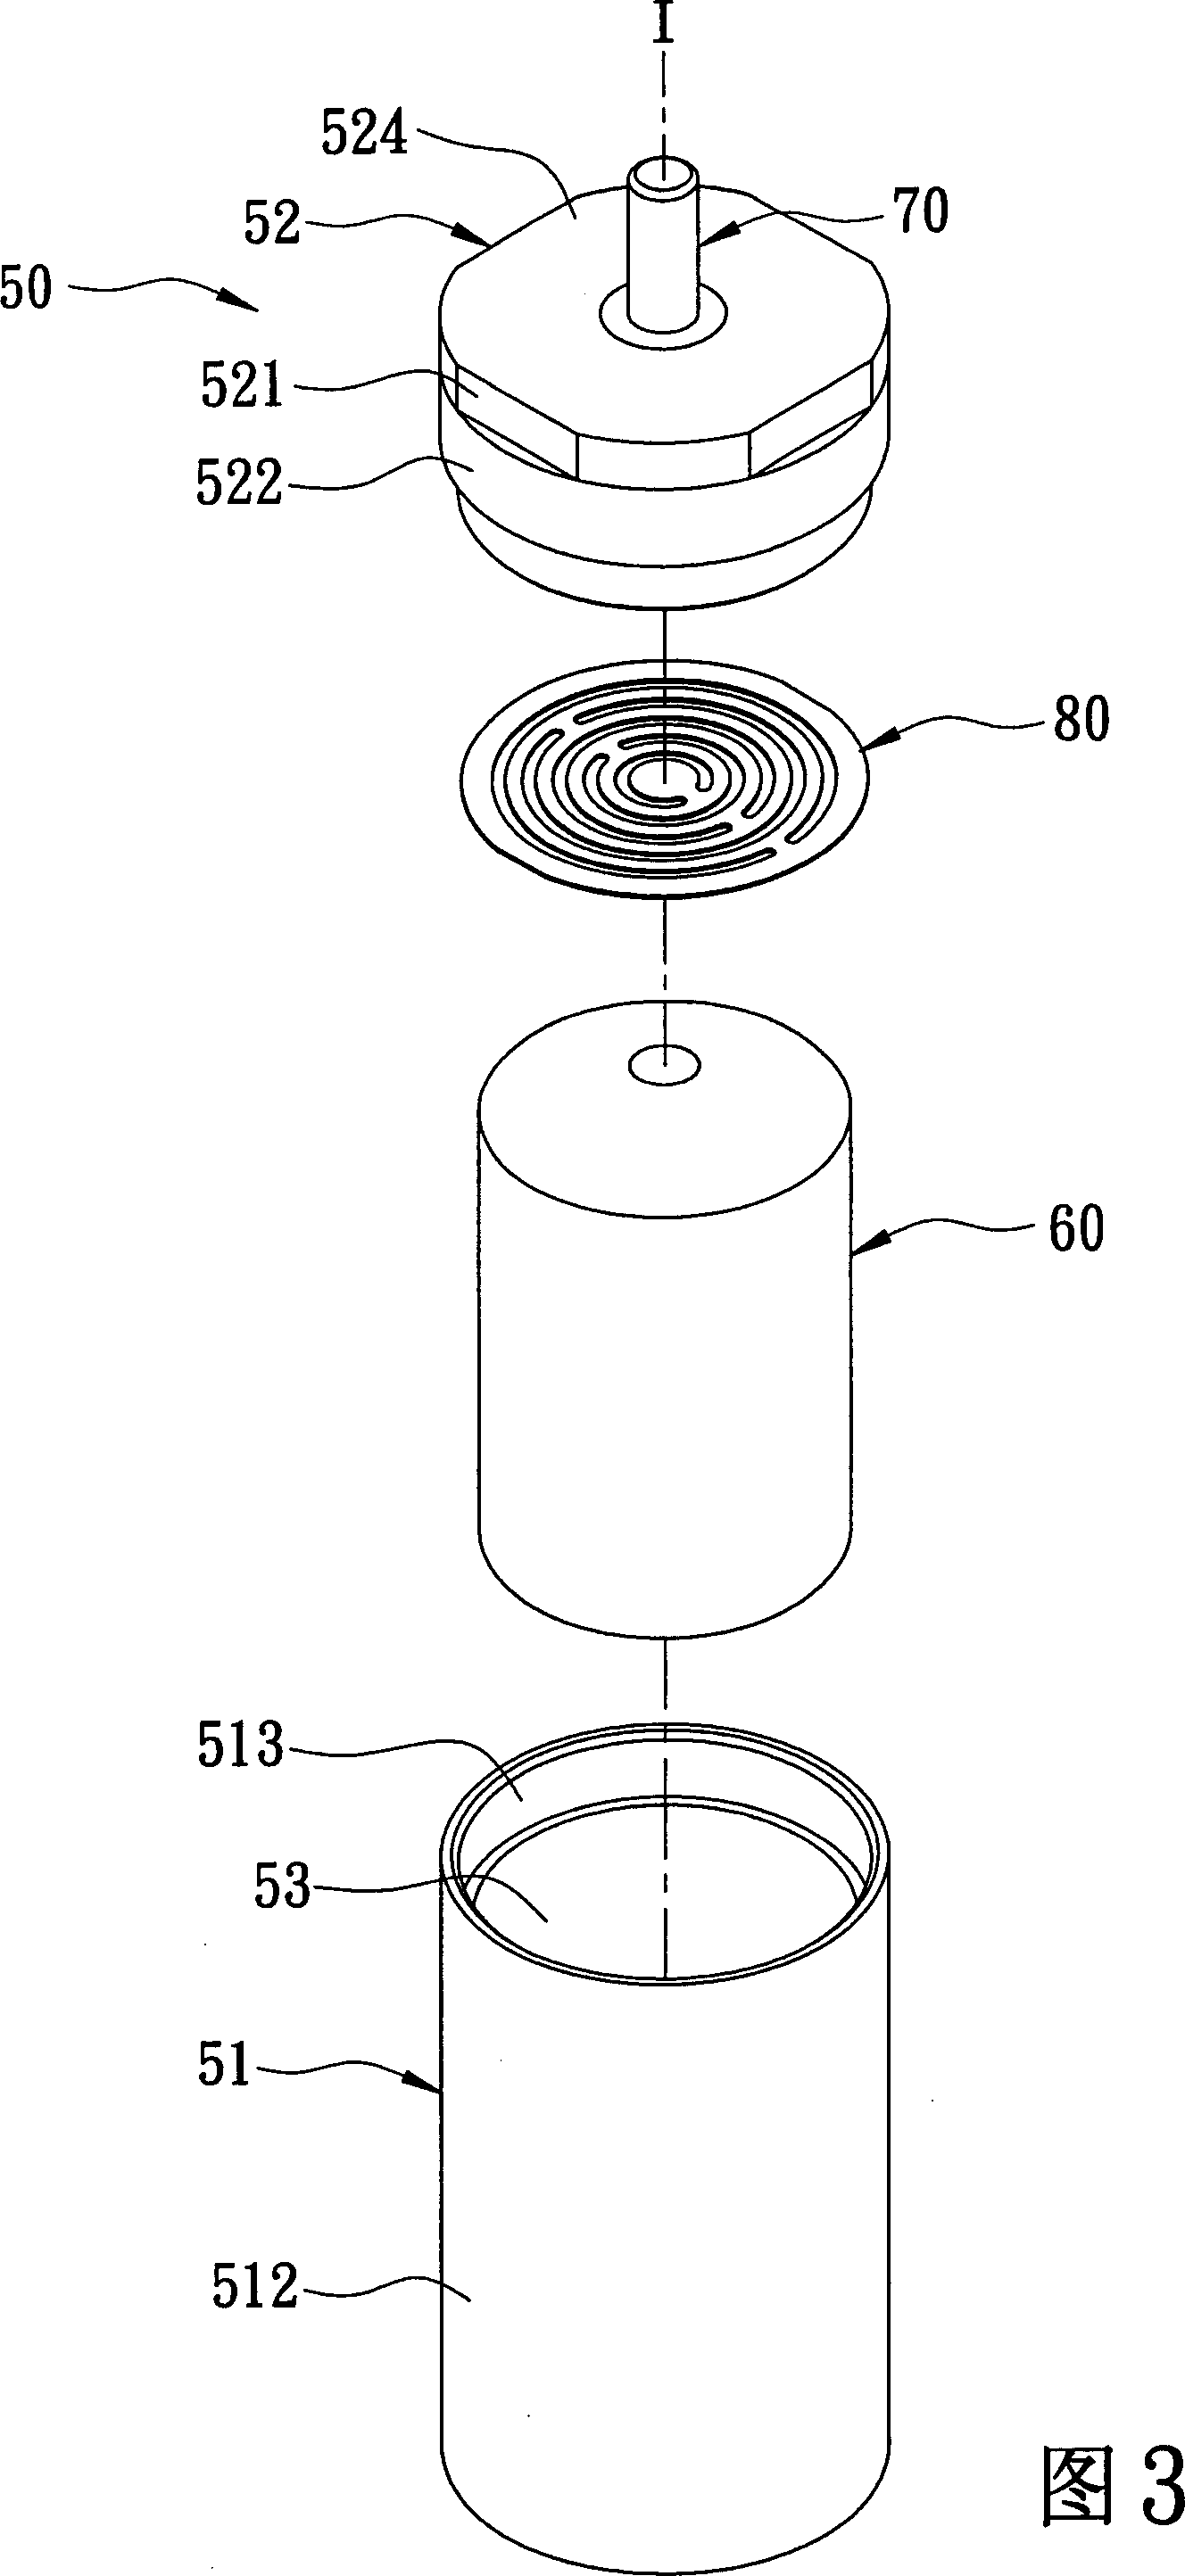 Single axis vibration switch